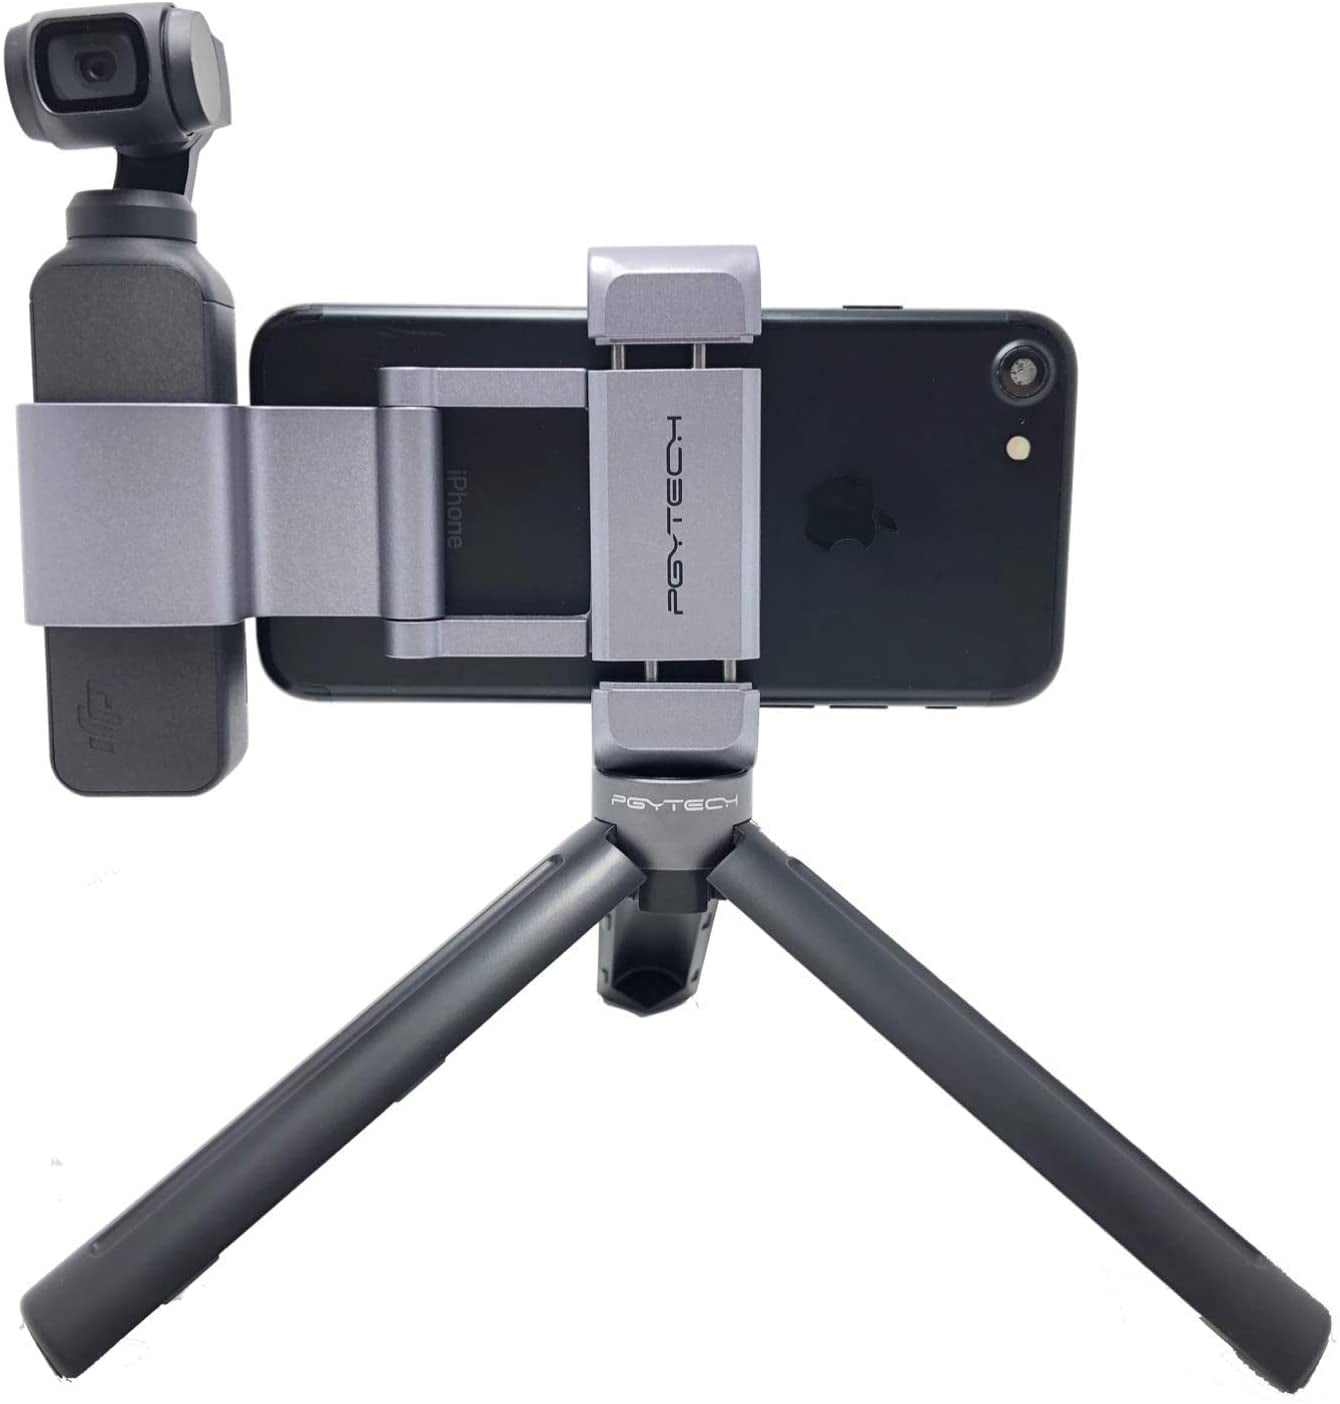 PGYTECH OSMO Pocket Phone Holder Expansion Accessories with Tripod Mini Compatible with DJI OSMO Pocket Accessories